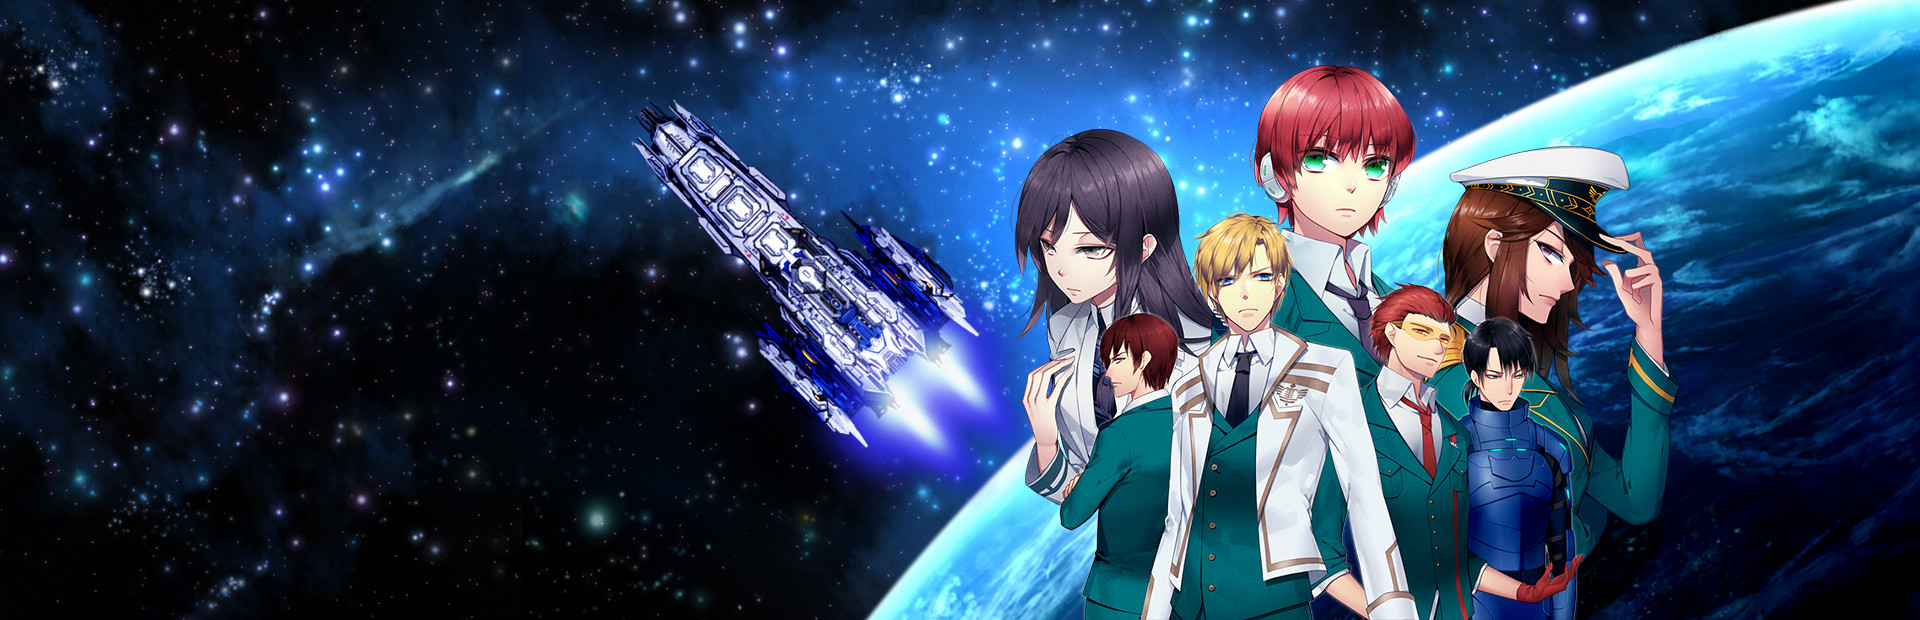 Sierra Ops - Space Strategy Visual Novel cover image